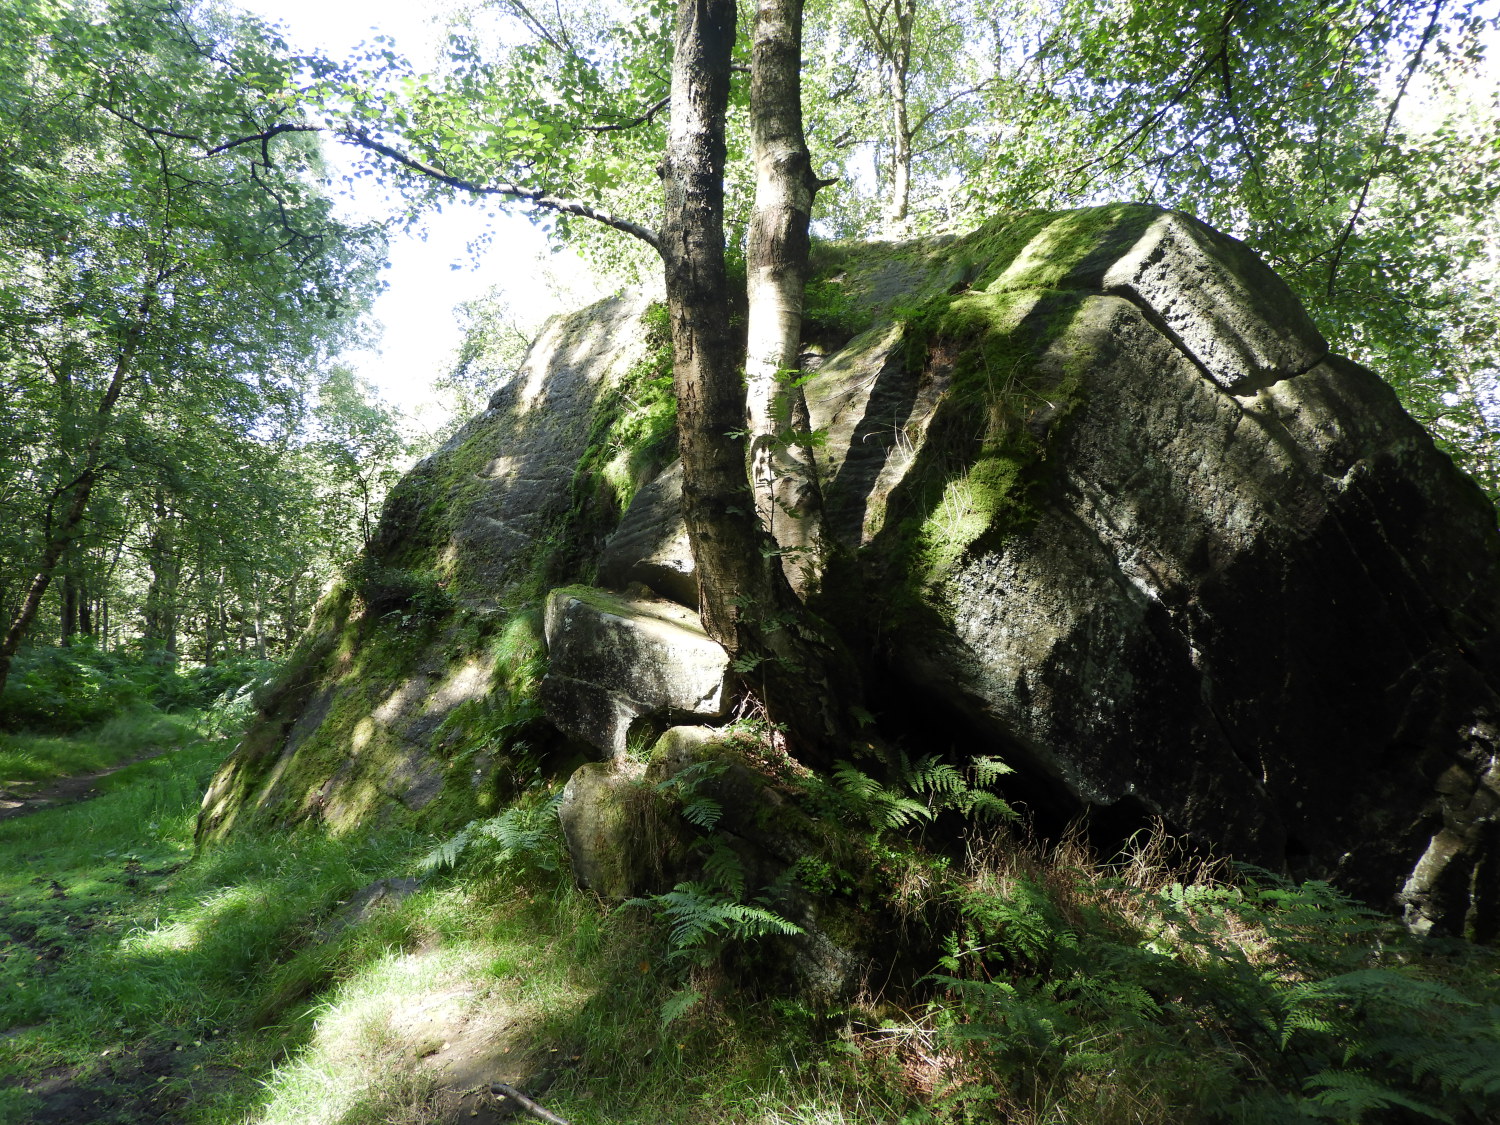 Granite outcrop in Guisecliff Wood